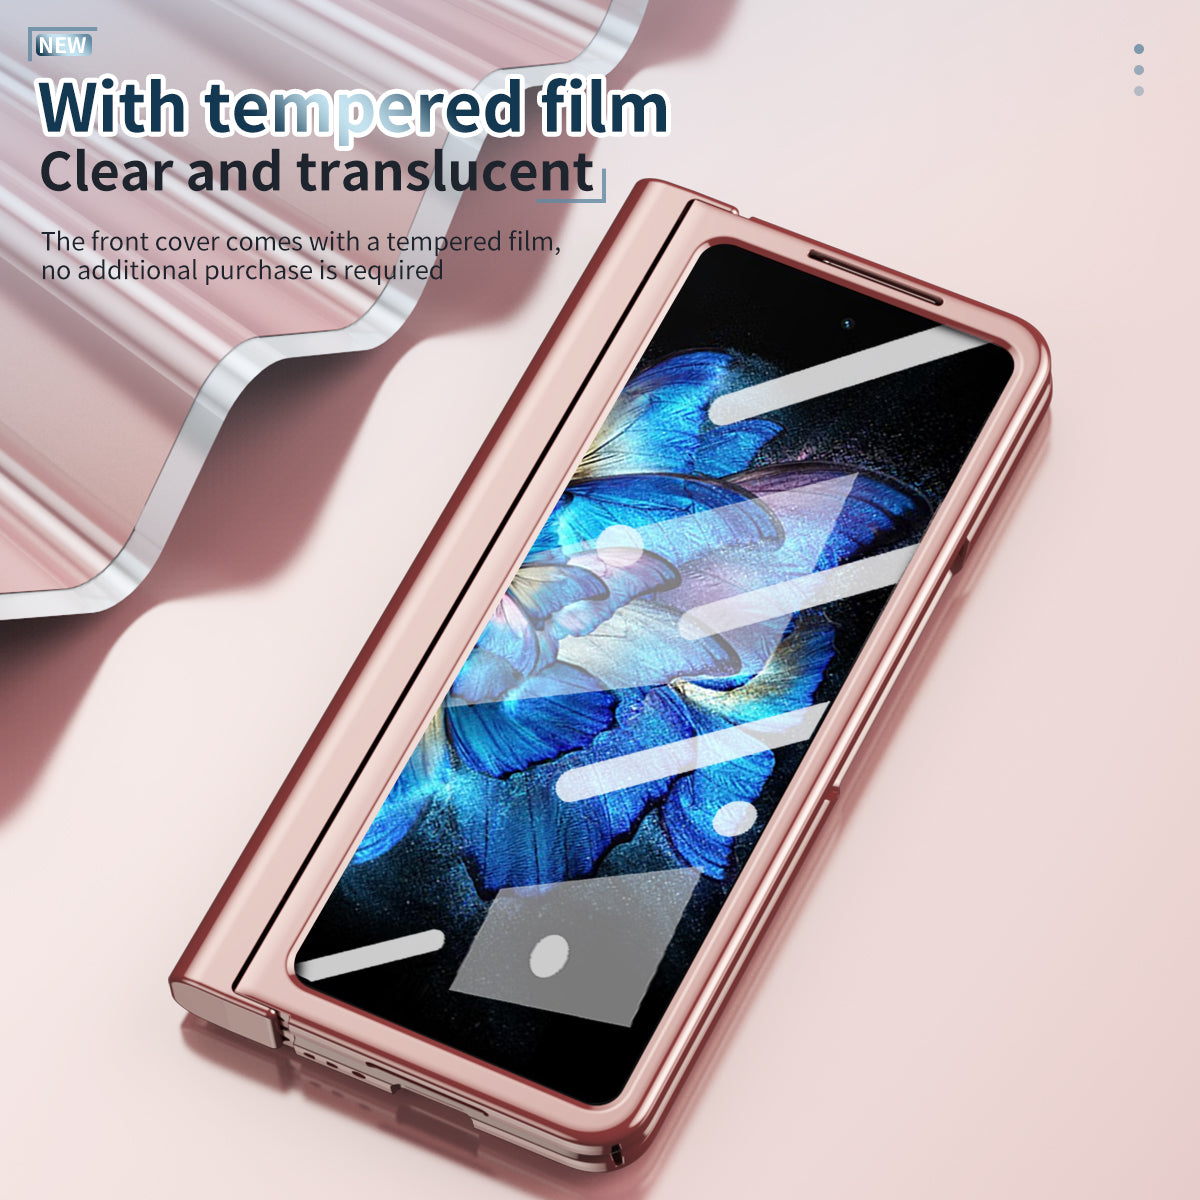 For vivo X Fold Tempered Glass Film Electroplating Phone Case Pen Slot Hinge Folding Hard PC Cover with Stylus Pen - Pink